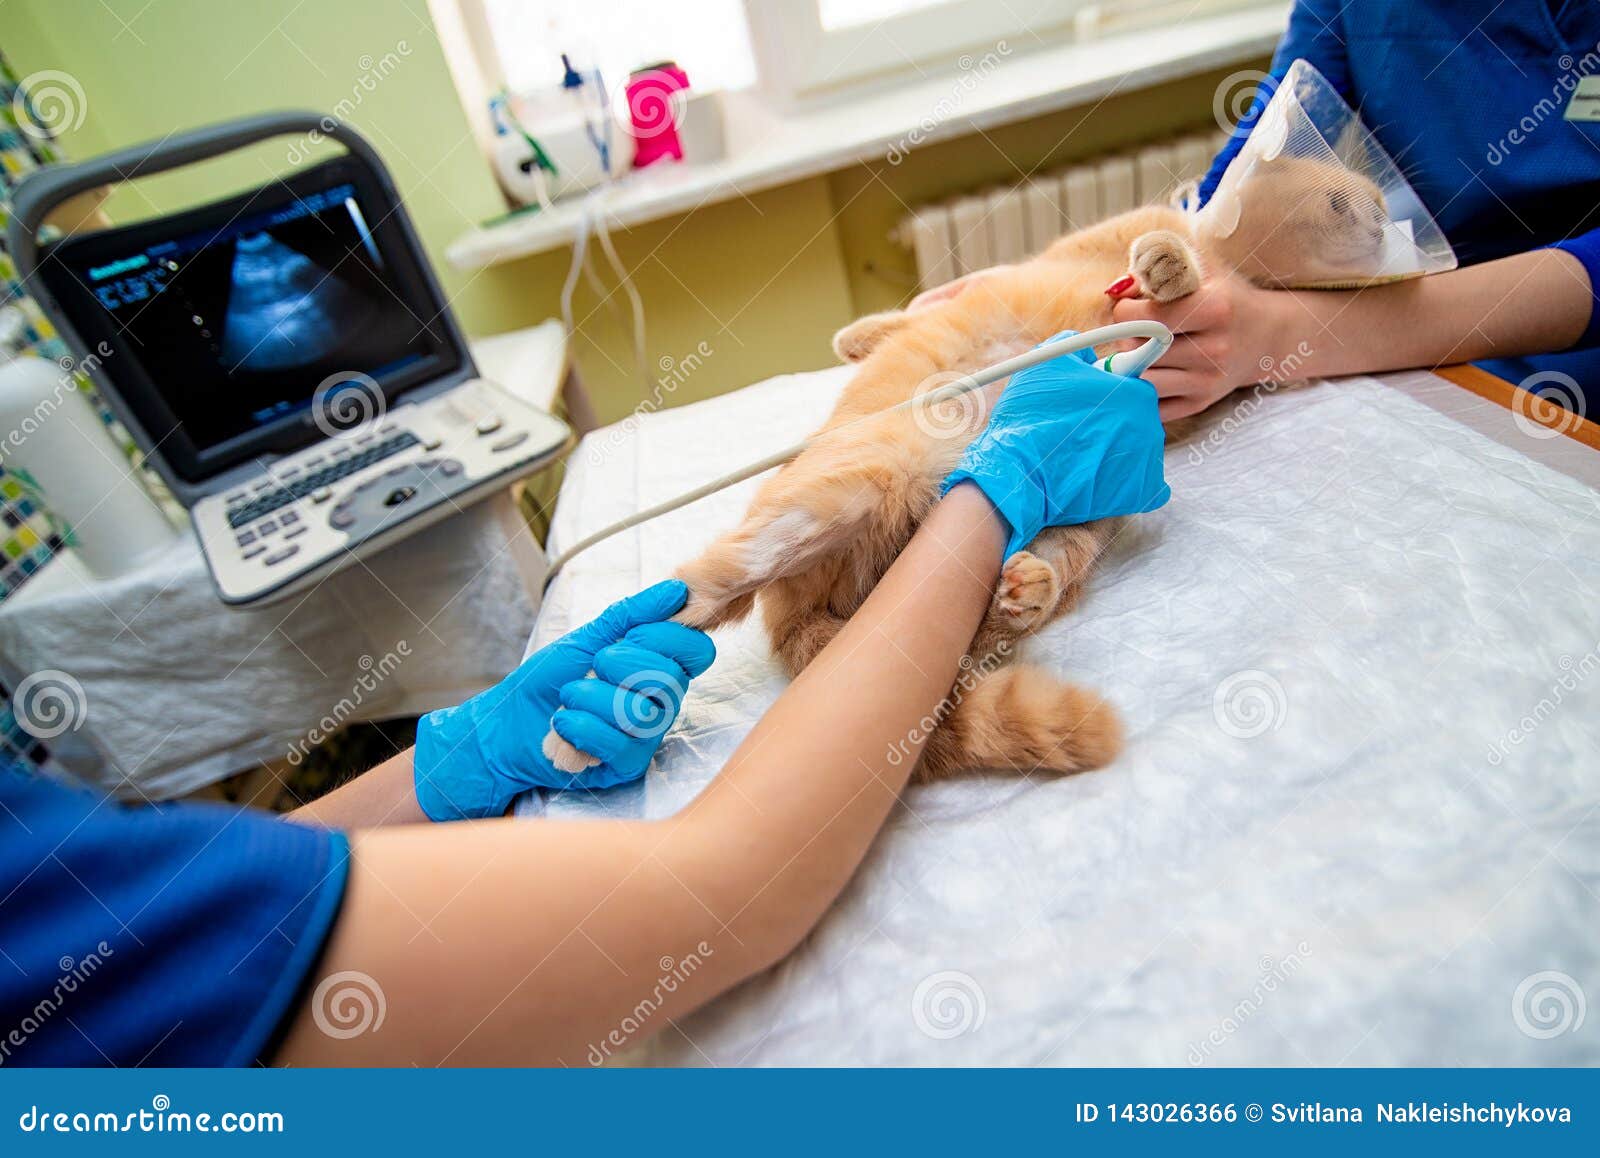 the doctor does an ultrasound examination of the cat`s abdomen